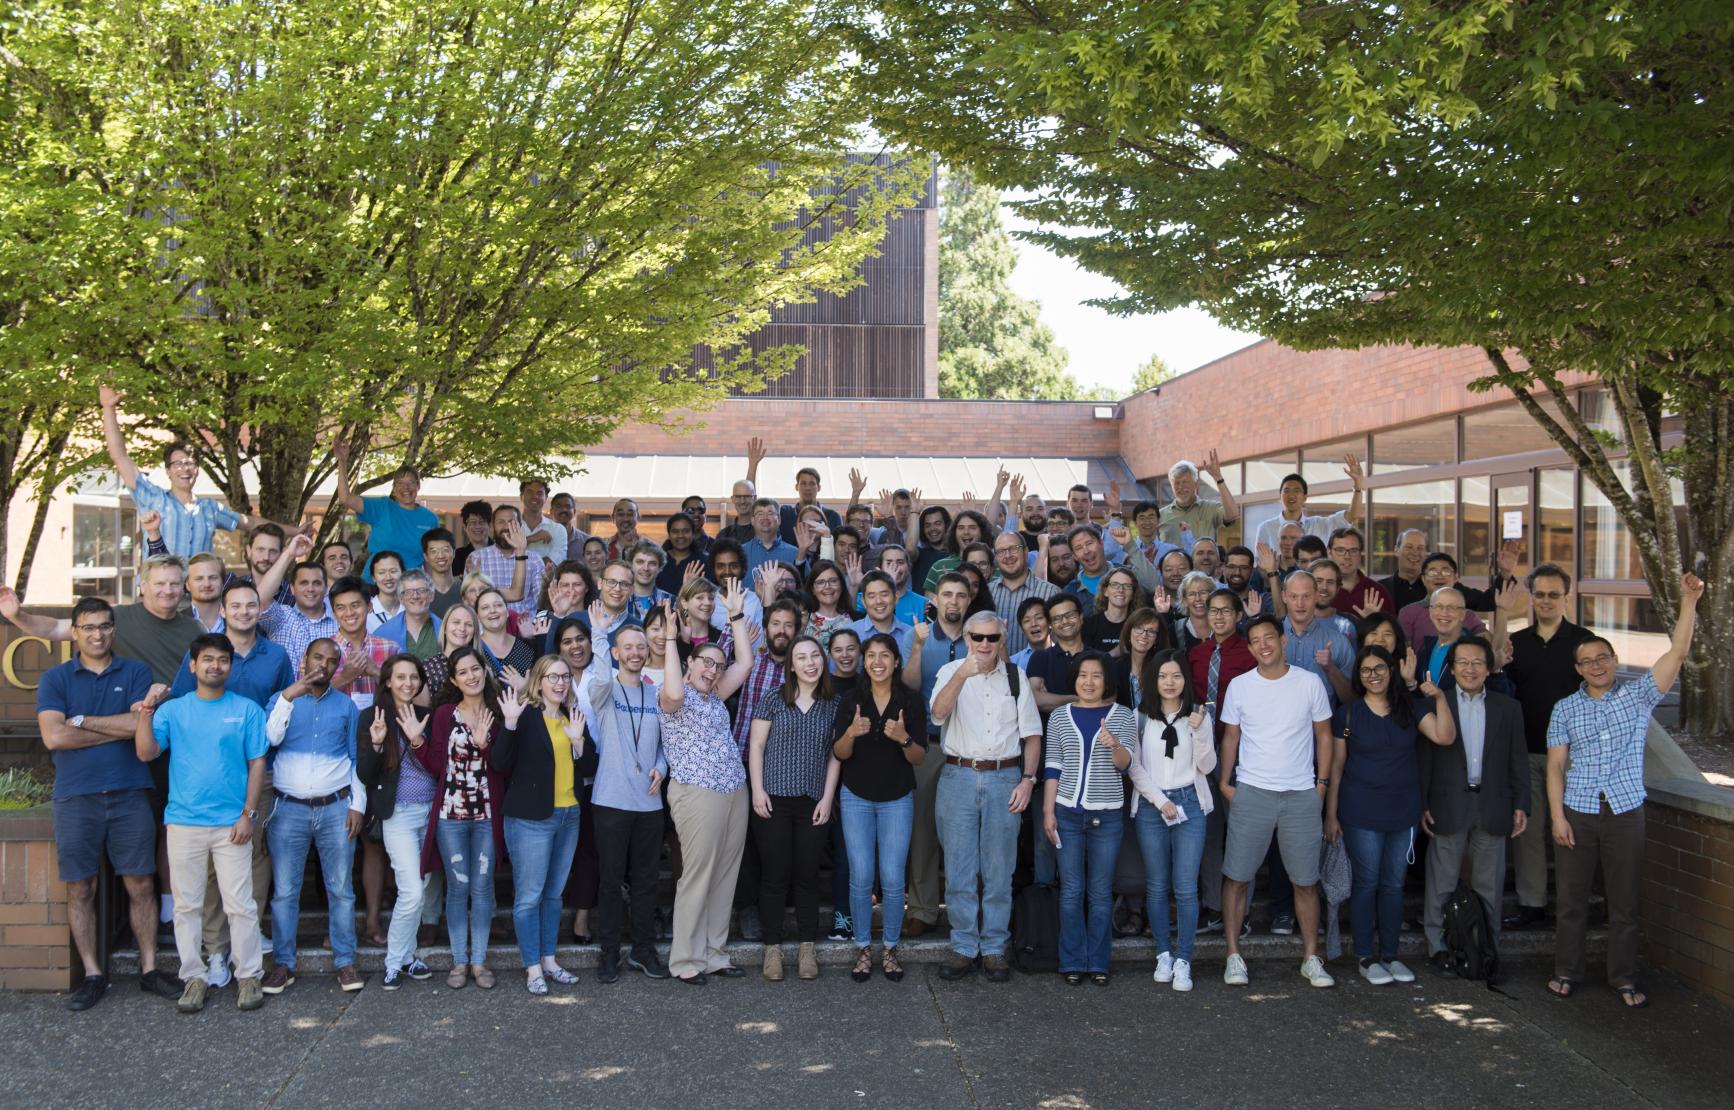 Group photo of attendees of the 2018 GCE Conference held at OSU. The group is standing outside in front of the conference building. 